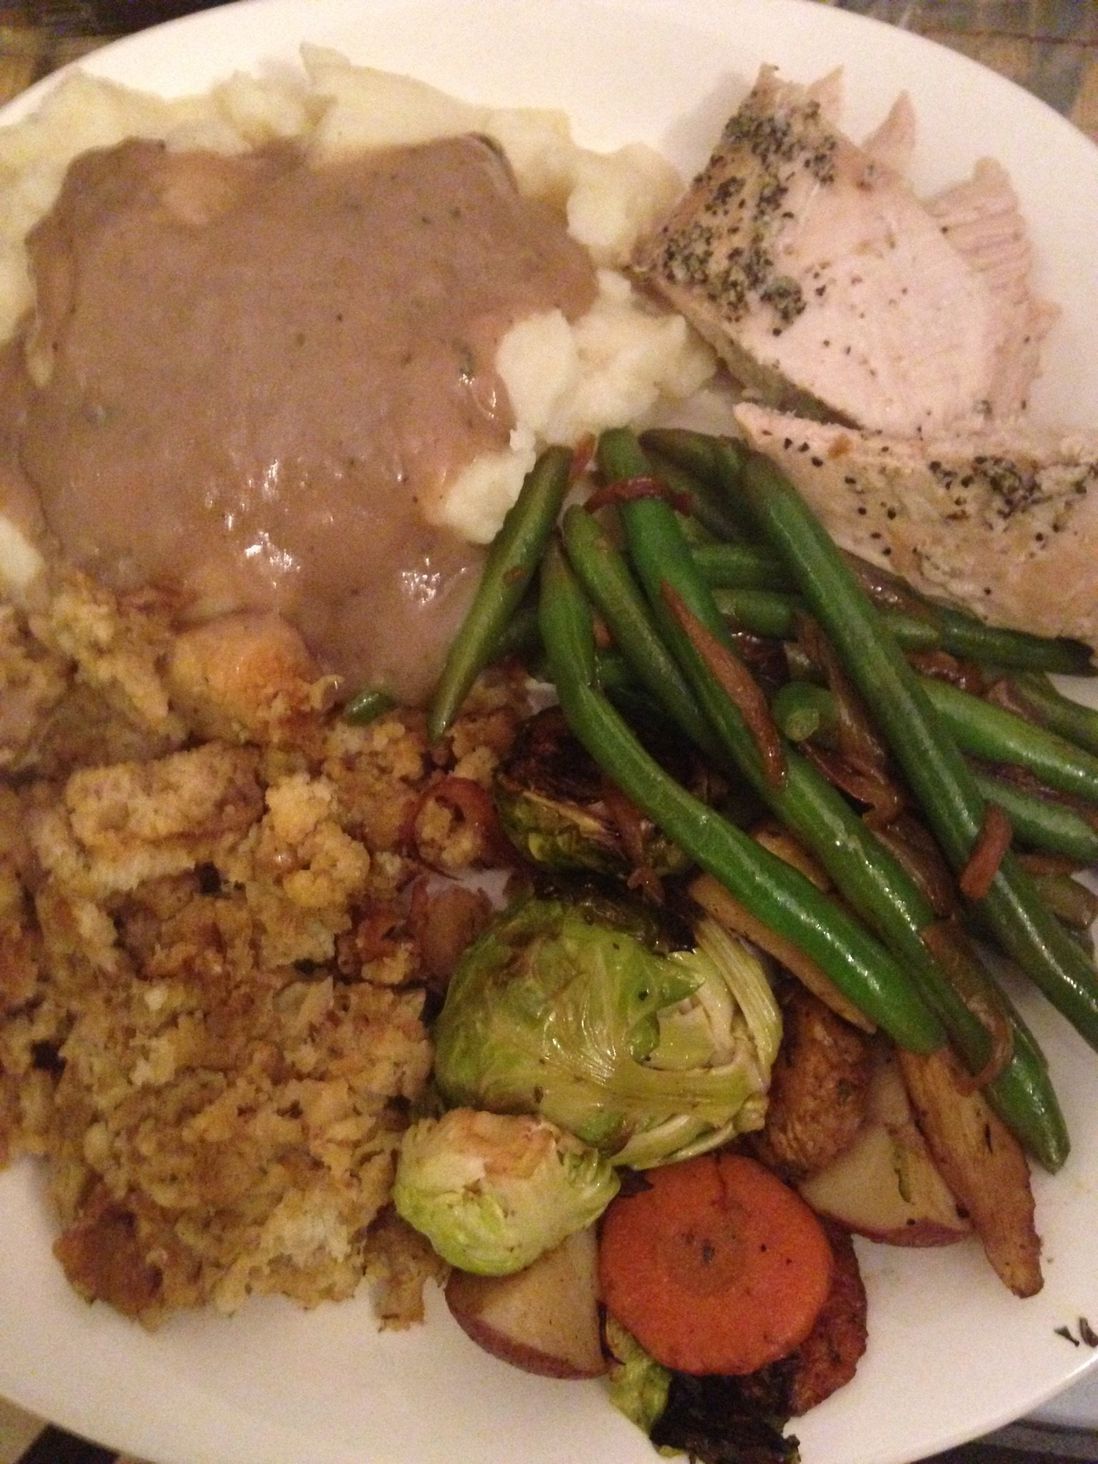 Turkey, Mashed Potatoes, Green Beans, Stuffing, Root Veggies, and Cannolis for dessert (not shown, because they immediately went into my tummy! nom nom) haha  All courtesy of Whole Foods catering ;) - Ana Milteer